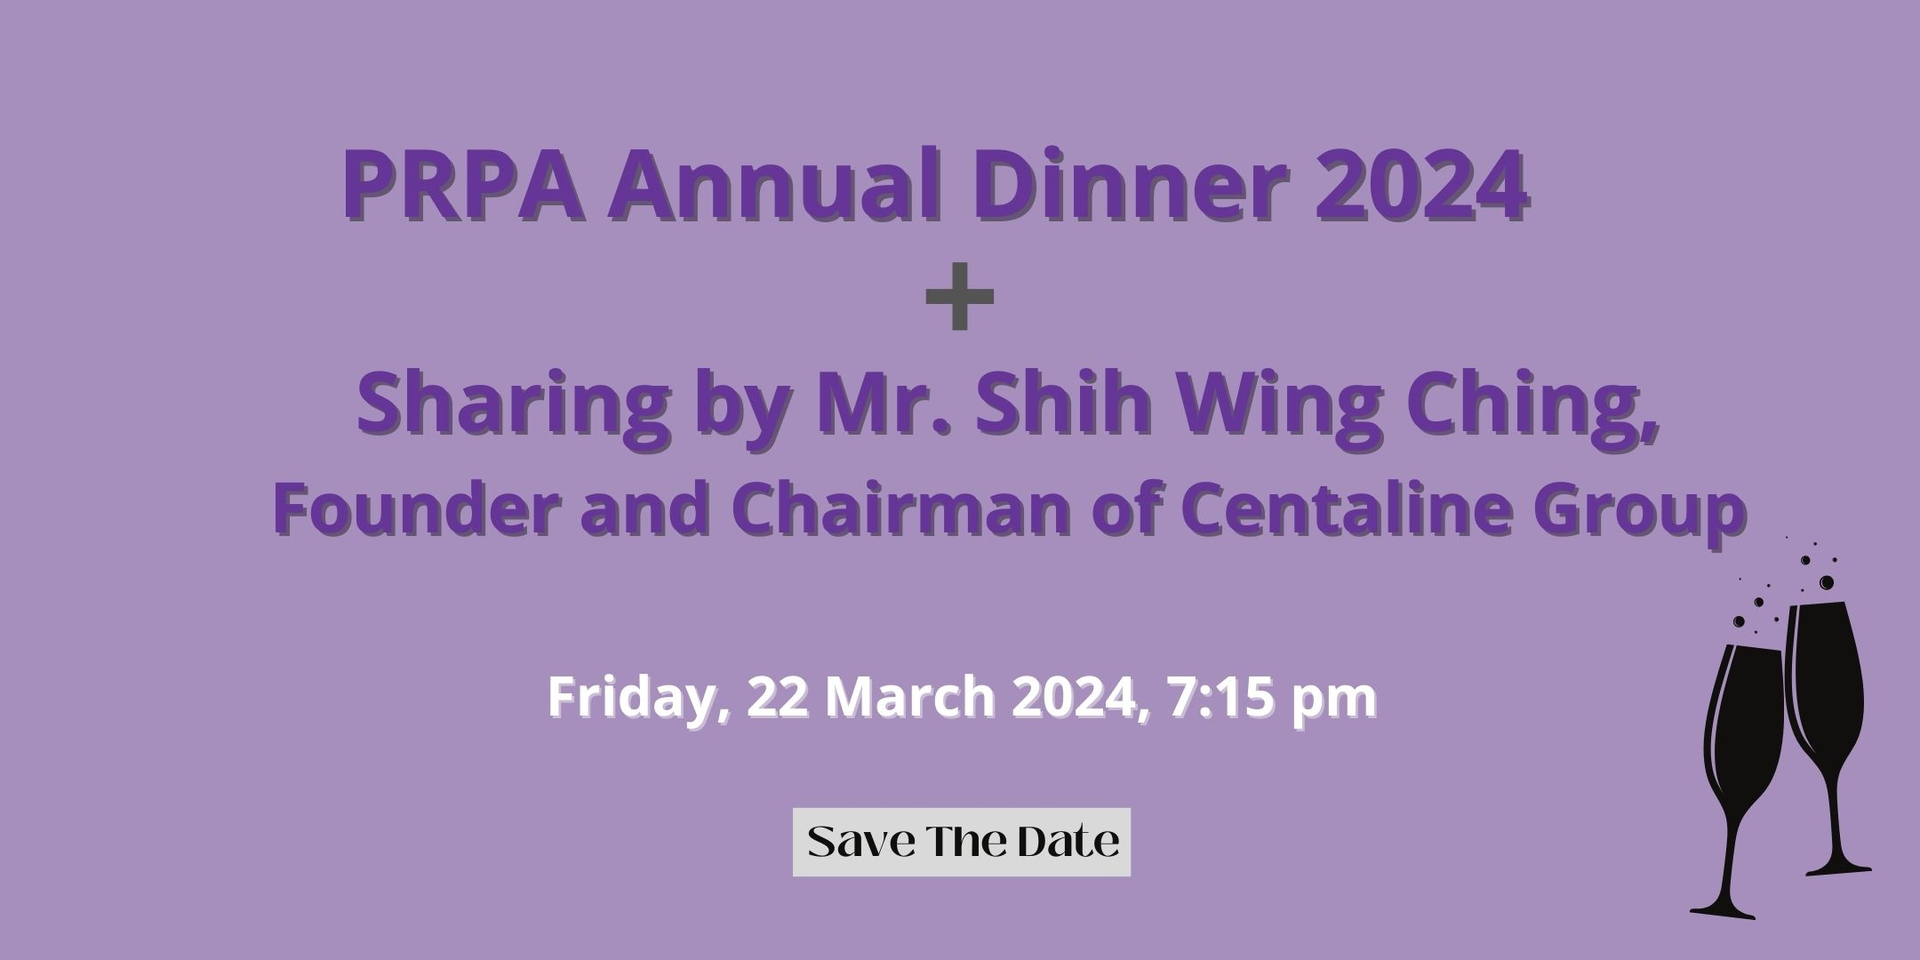 thumbnails PRPA Annual Dinner 2024, Sharing by Mr. Shih Wing Ching, Founder and Chairman of Centaline Group